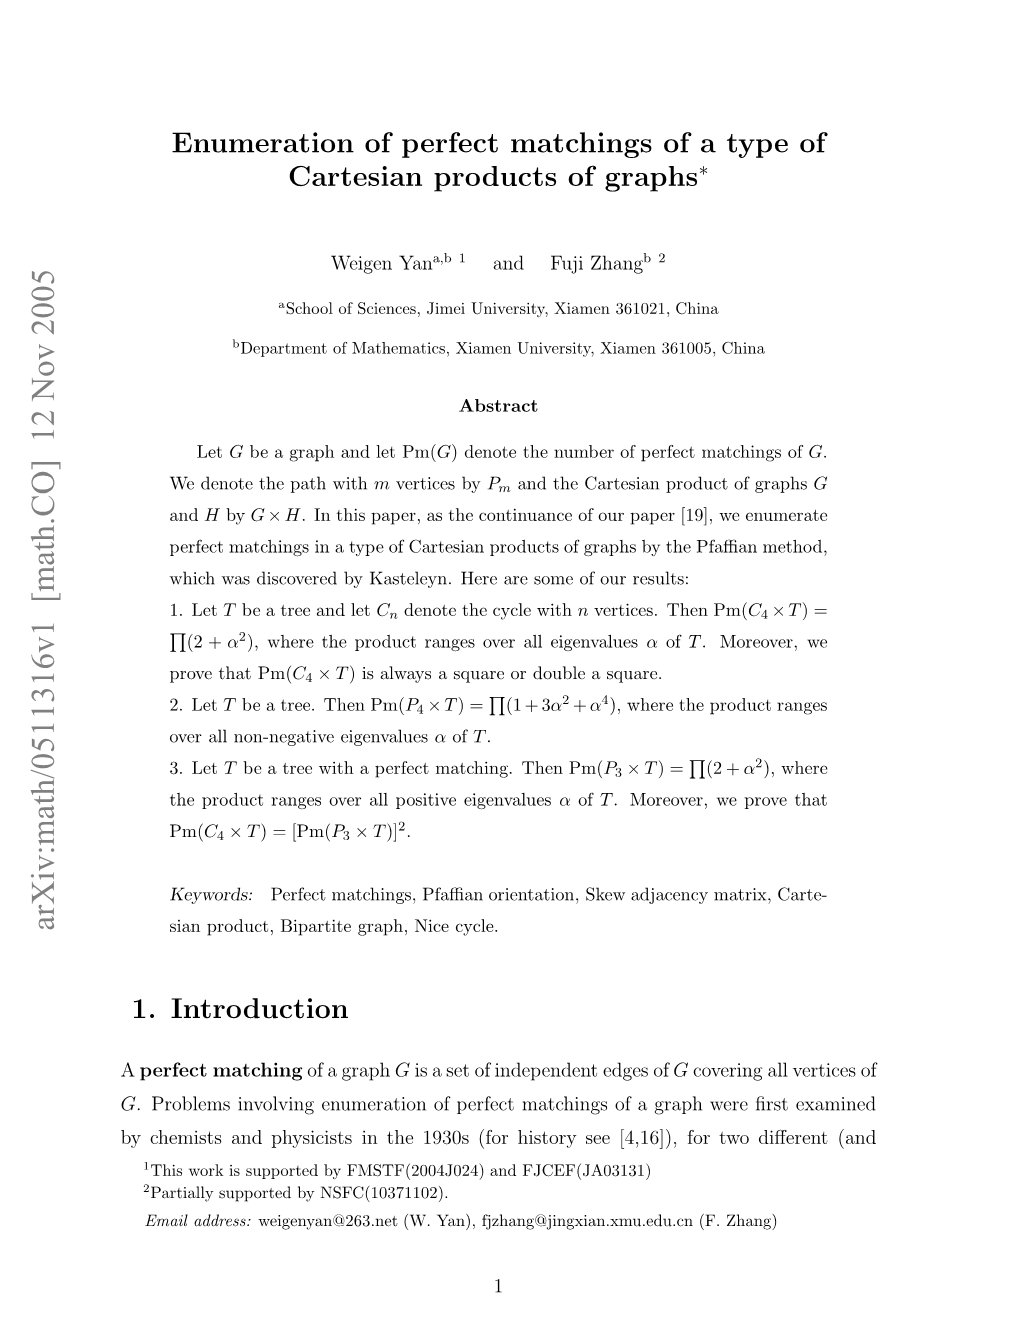 Enumeration of Perfect Matchings of a Type of Cartesian Products of Graphs